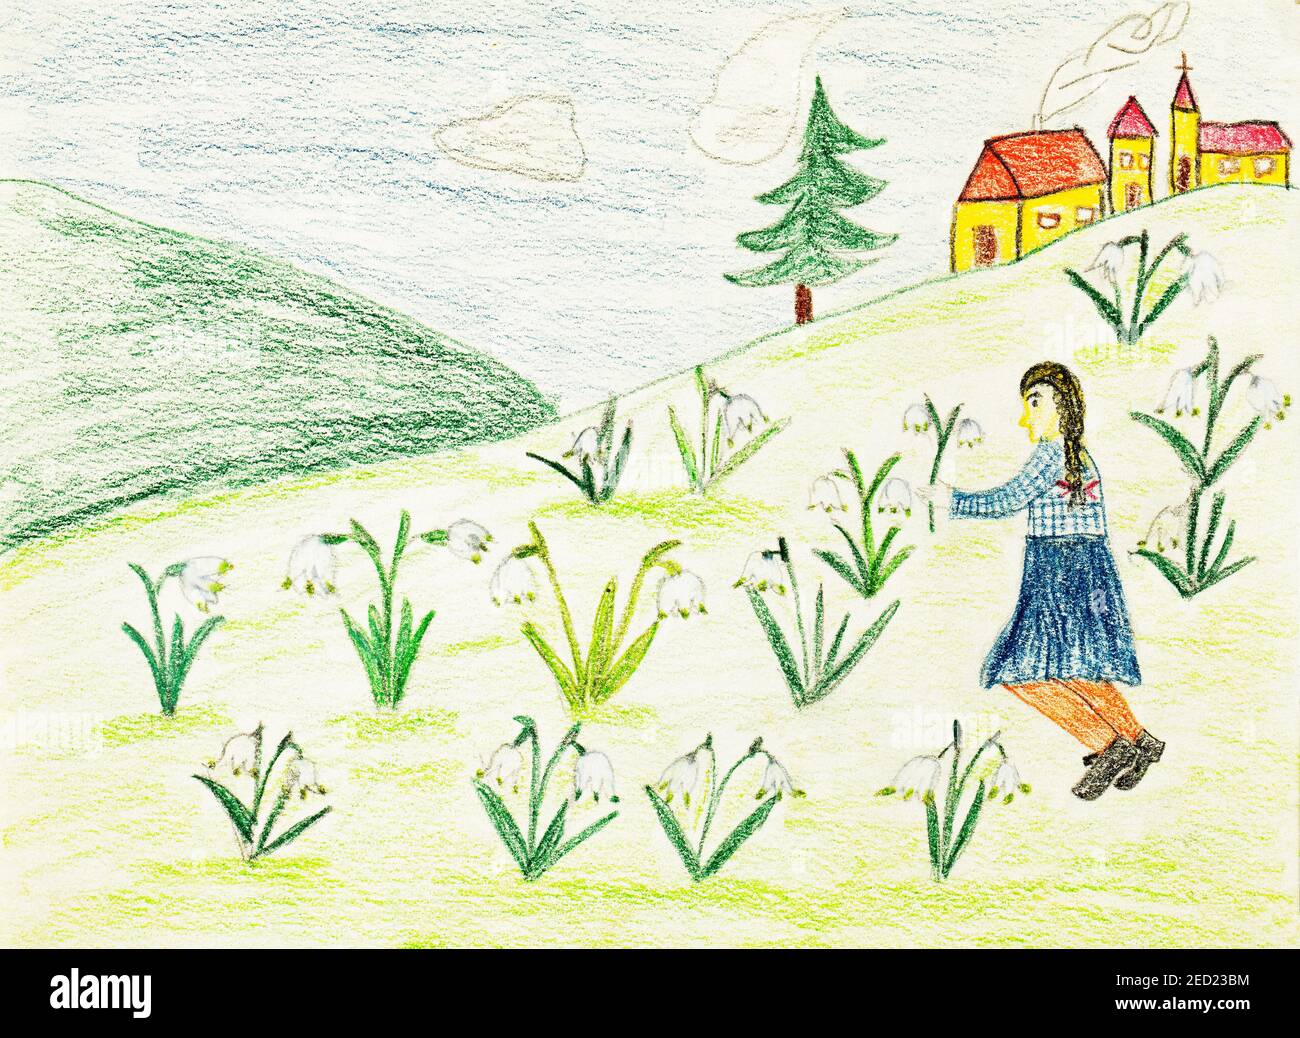 Naive illustration, children drawing, girl picking snowdrops on a flower meadow, Austria Stock Photo